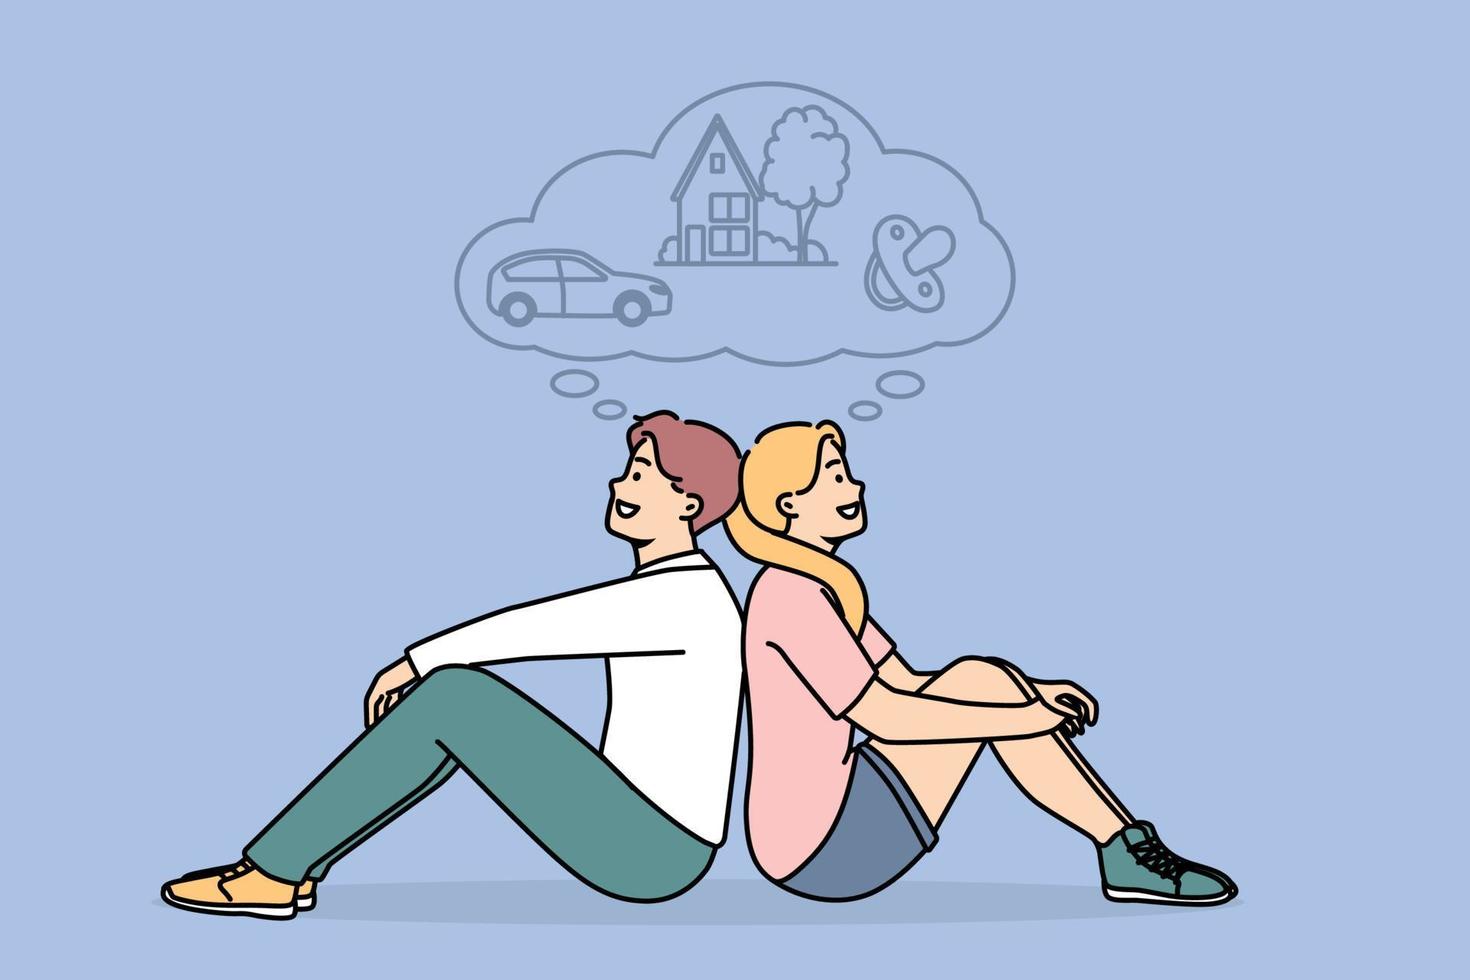 Happy dreamy couple imagine bright future together. Smiling man and woman dream of shared life, make plans for motherhood, realty and car. Family planning. Vector illustration.